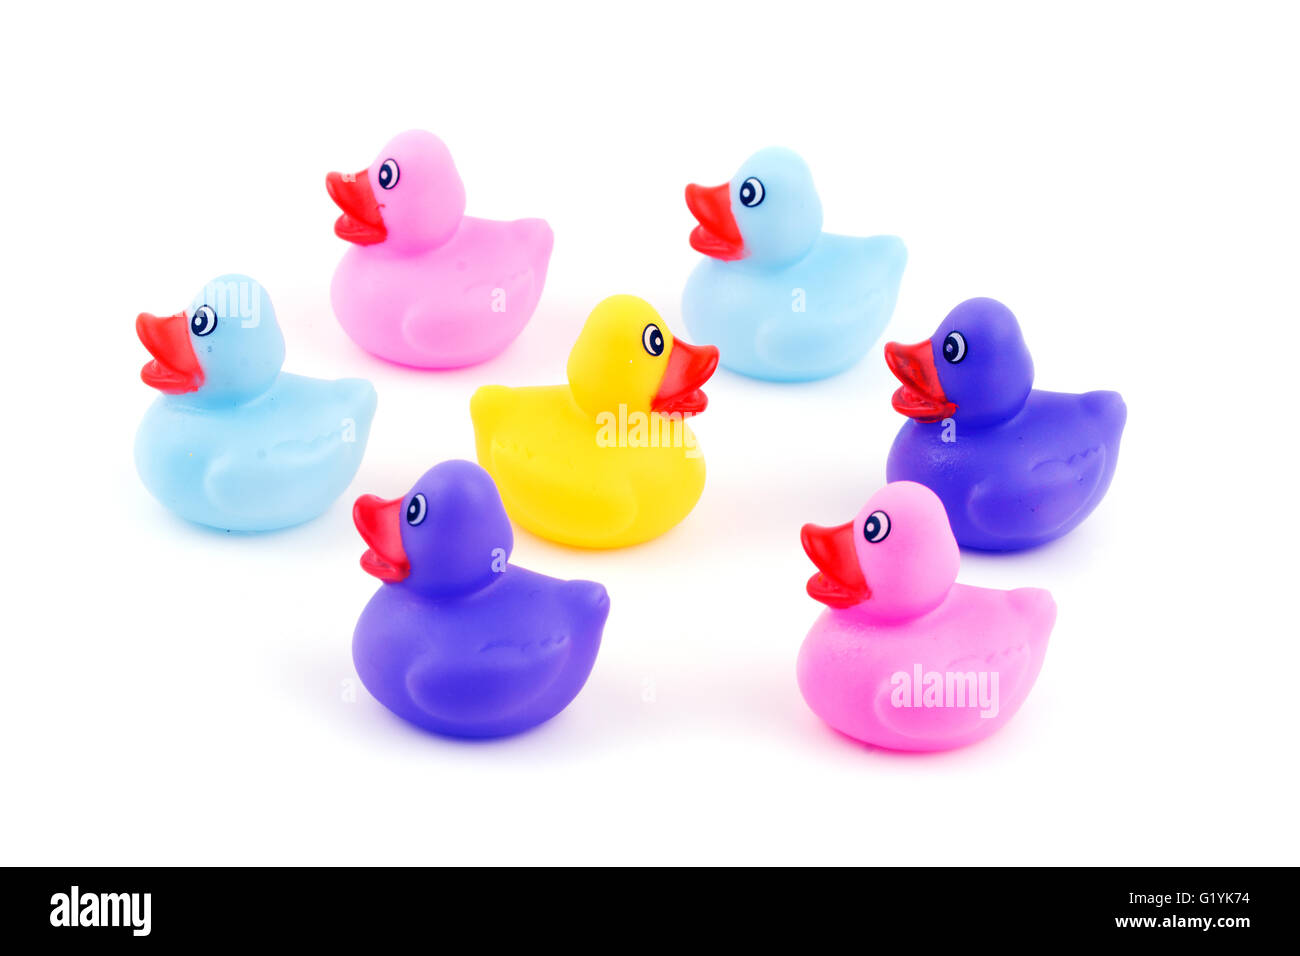 Group of rubber ducklings with one going to opposite direction - concept of individuality Stock Photo